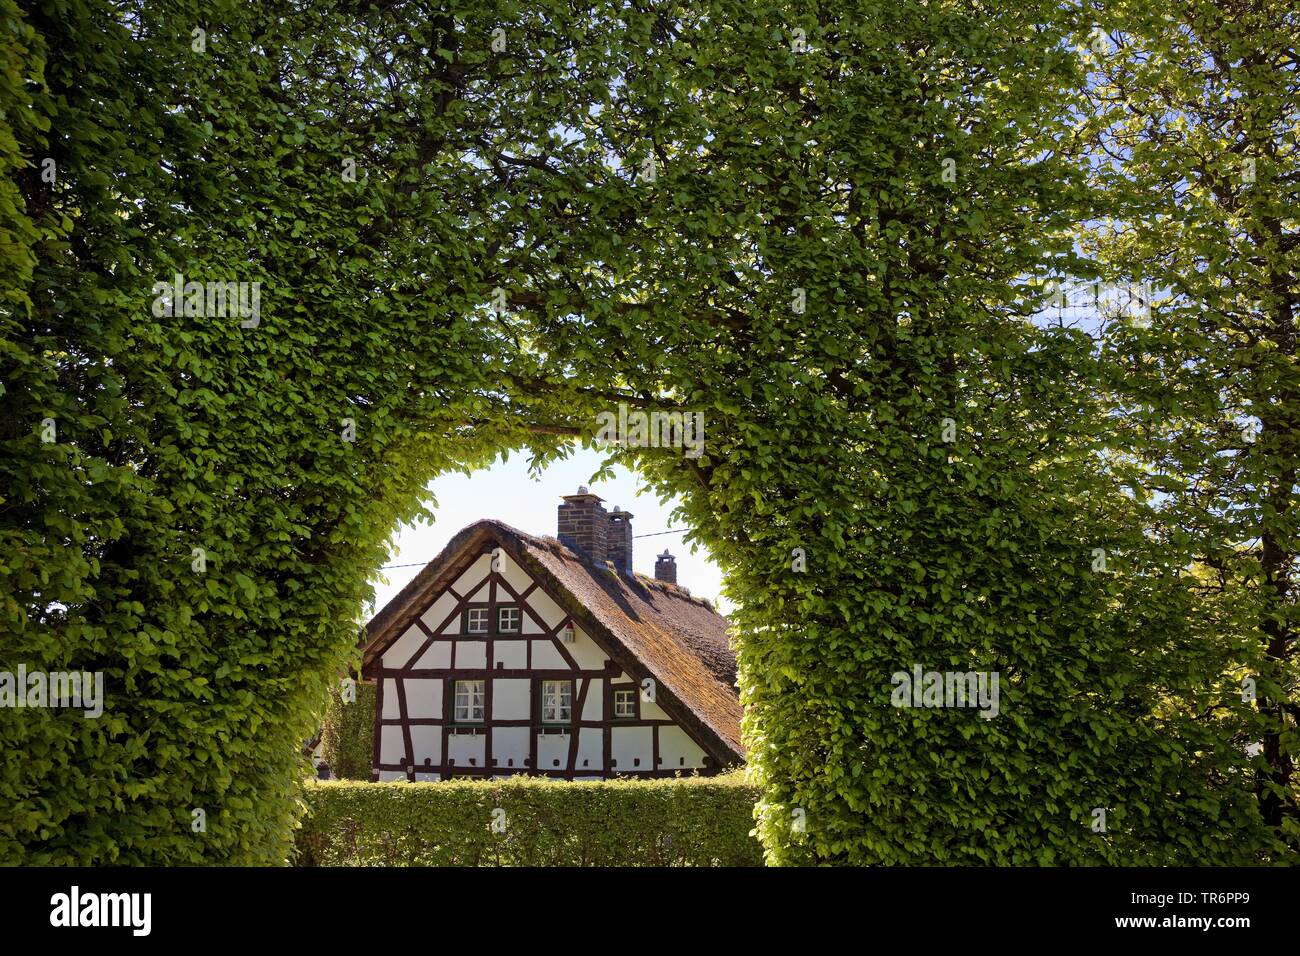 common beech (Fagus sylvatica), meter-high beech hedge and access to traditonal half-timbered house in district Hoefen, Germany, North Rhine-Westphalia, Eifel, Monschau Stock Photo